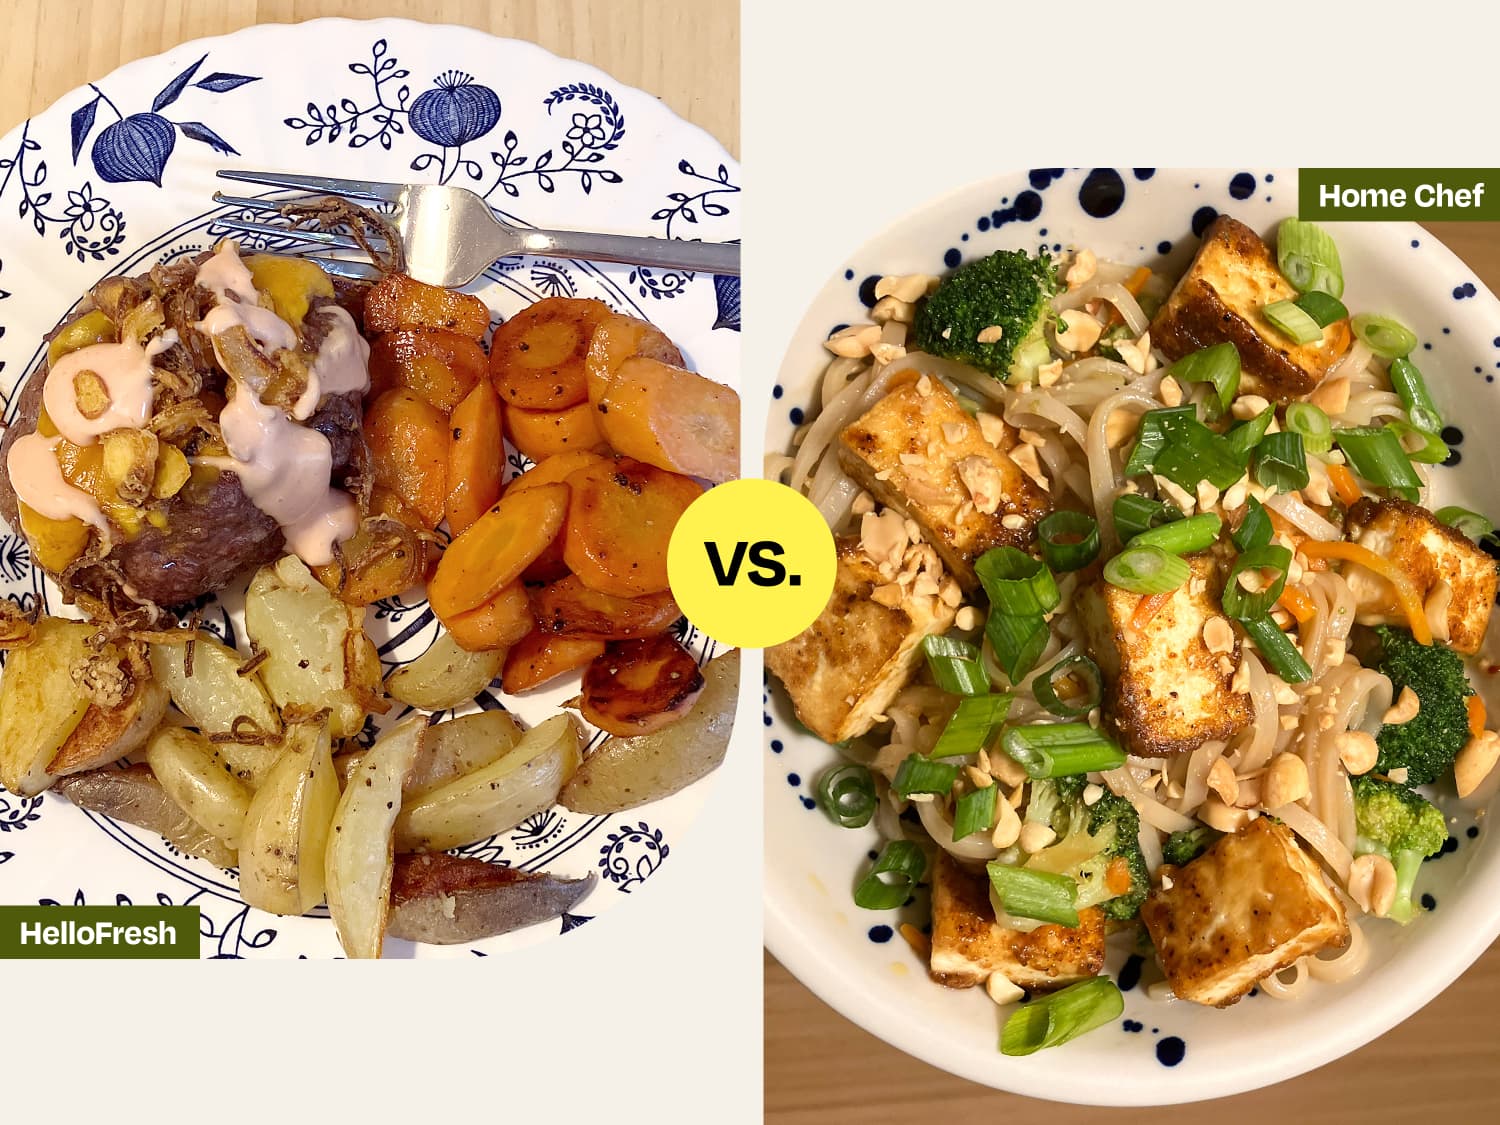 HelloFresh vs. Home Chef: I Tried Both Meal Kits and This Is the One I’ll Order Again